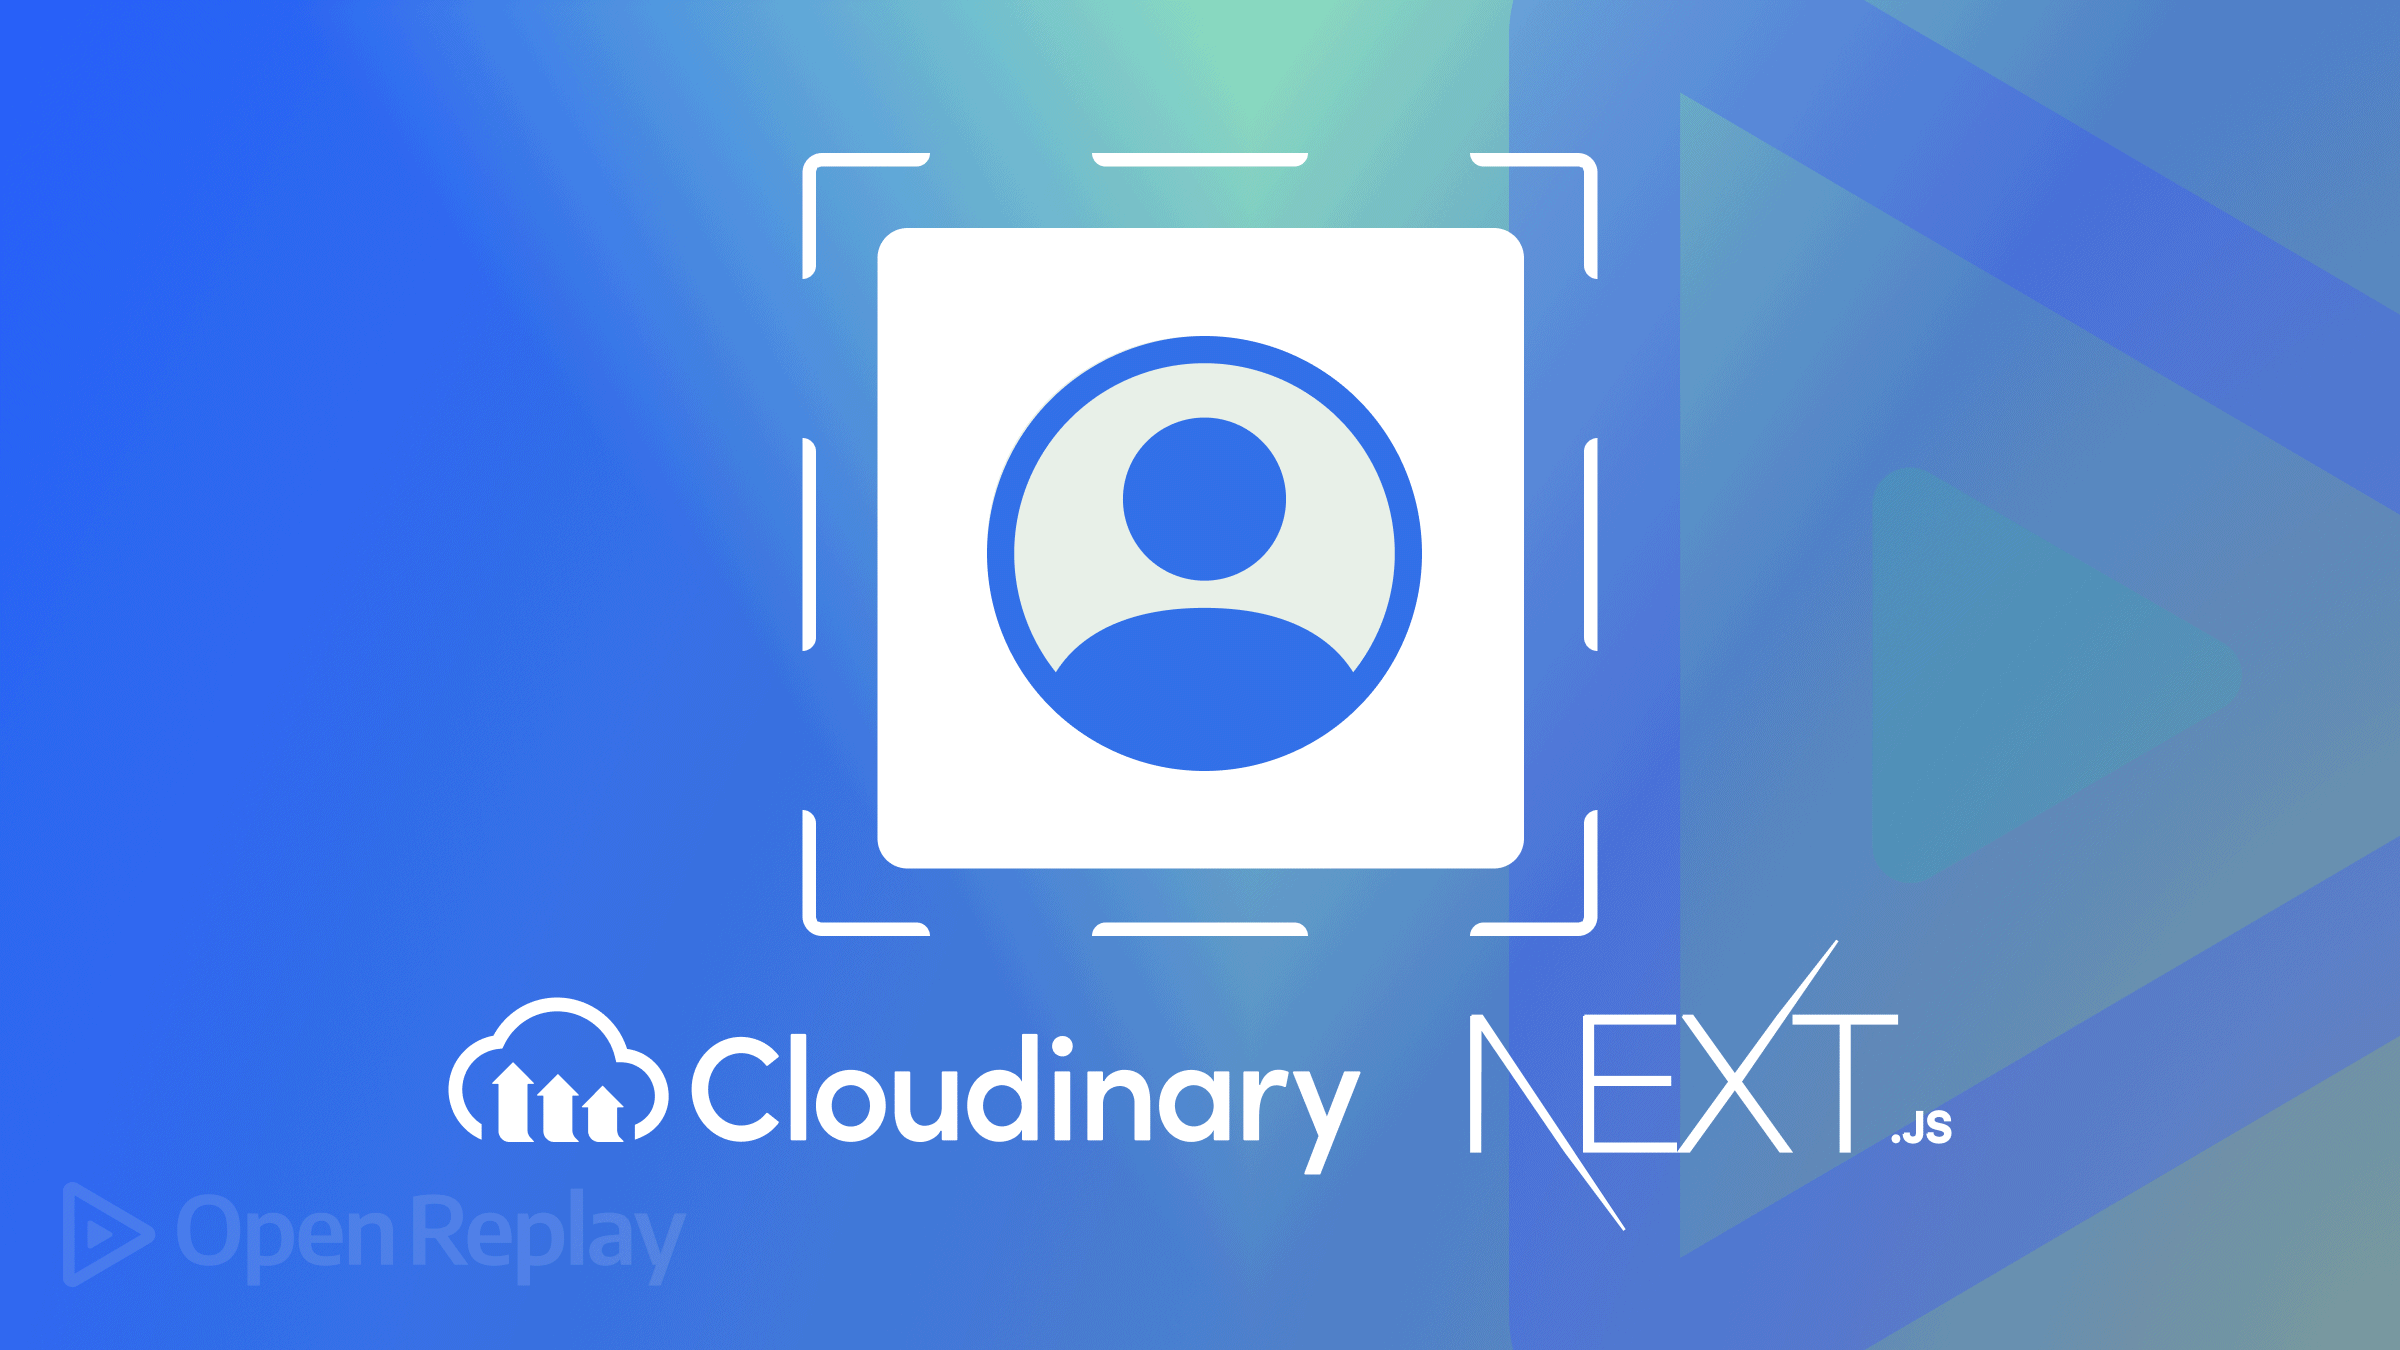 Recognizing faces with Cloudinary and Next